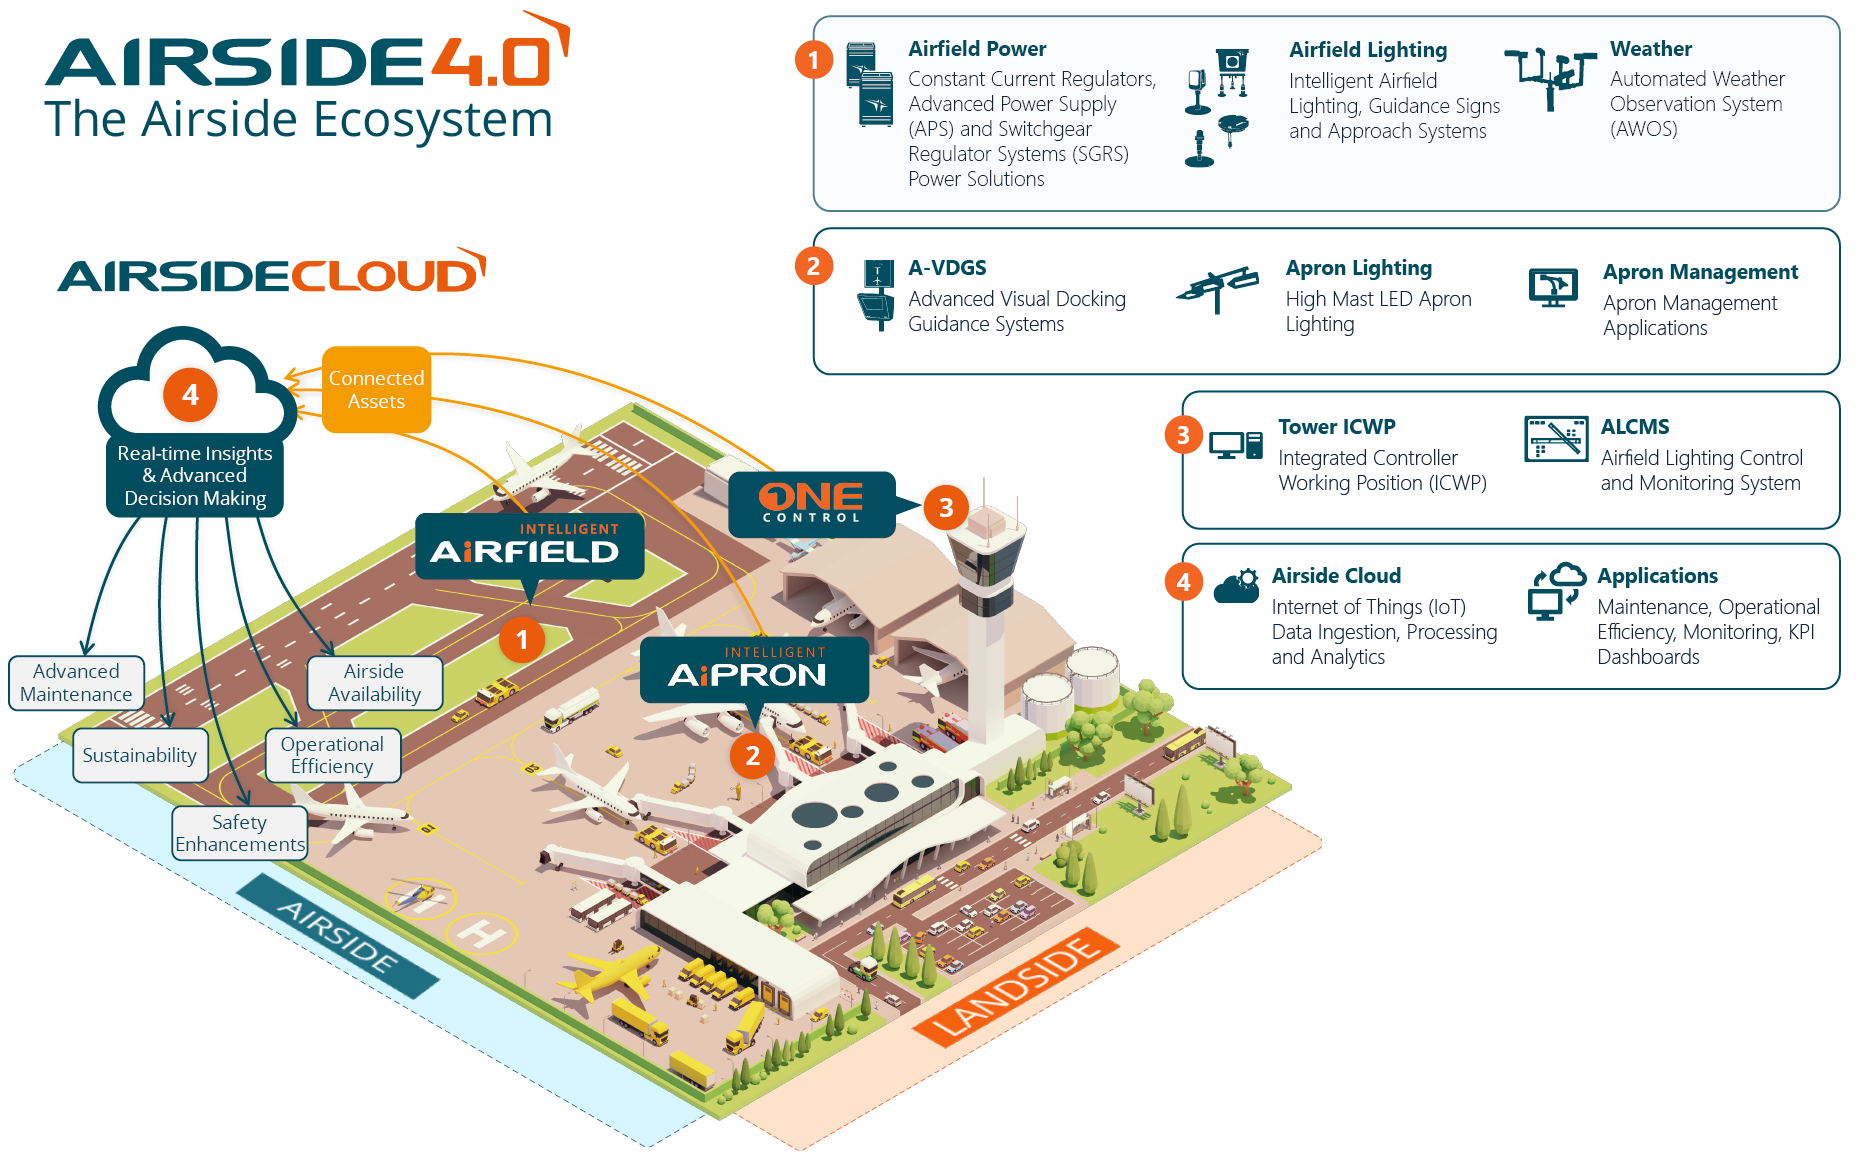 ADB SAFEGATE Airside 4.0 Eco-sytem with technologies that can unleash the power of data, automation and predictability to provide airports with actionable insights to enhance airside operations.